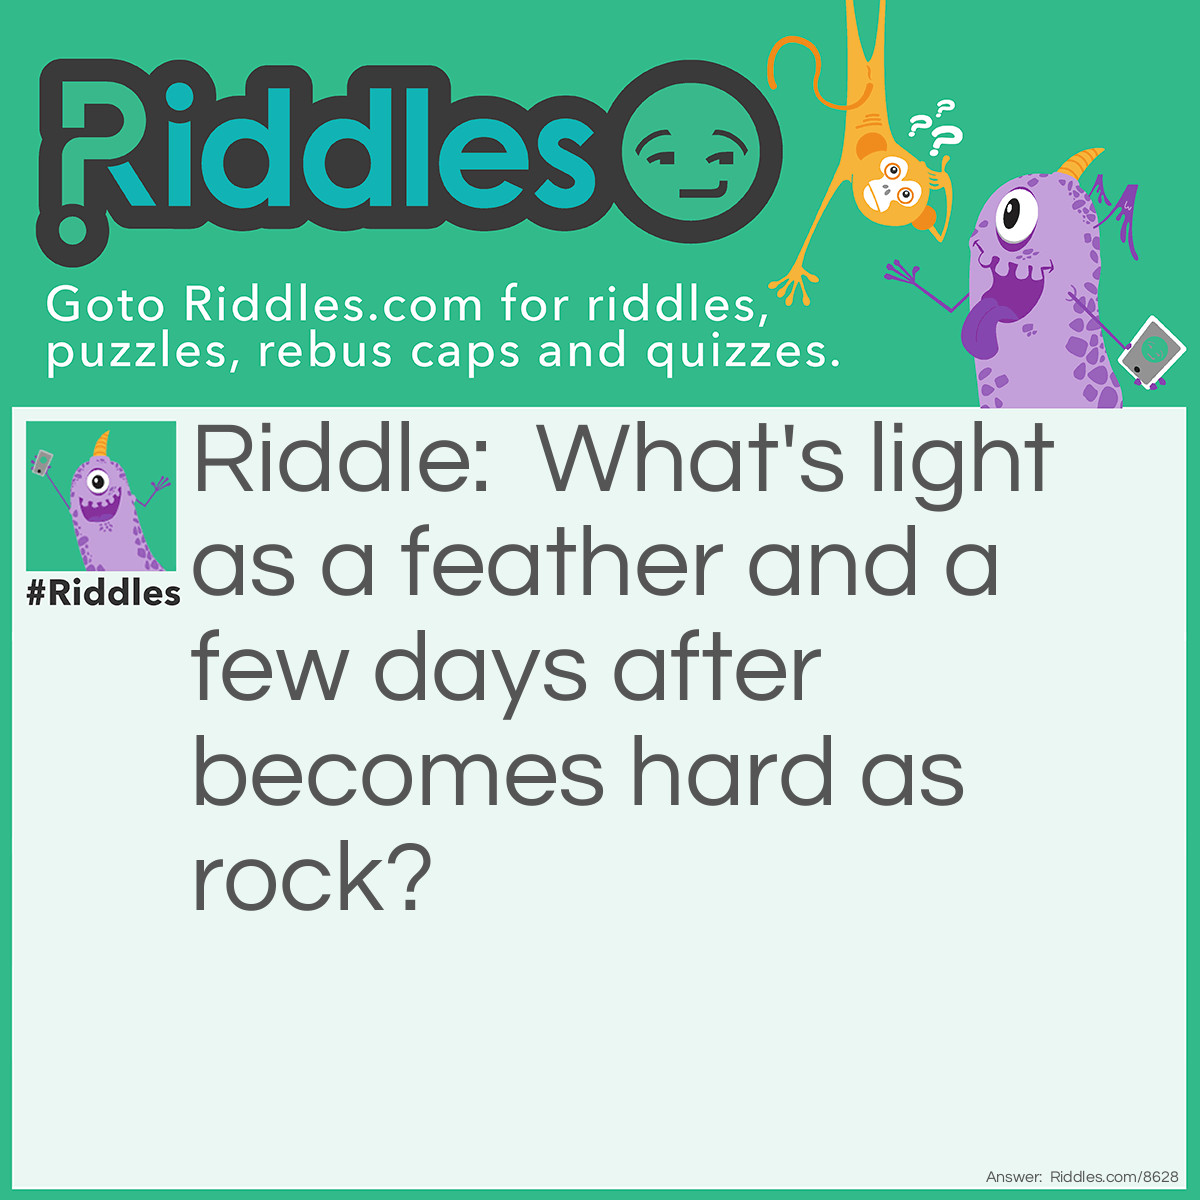 Riddle: What's light as a feather and a few days after becomes hard as rock? Answer: Snow.